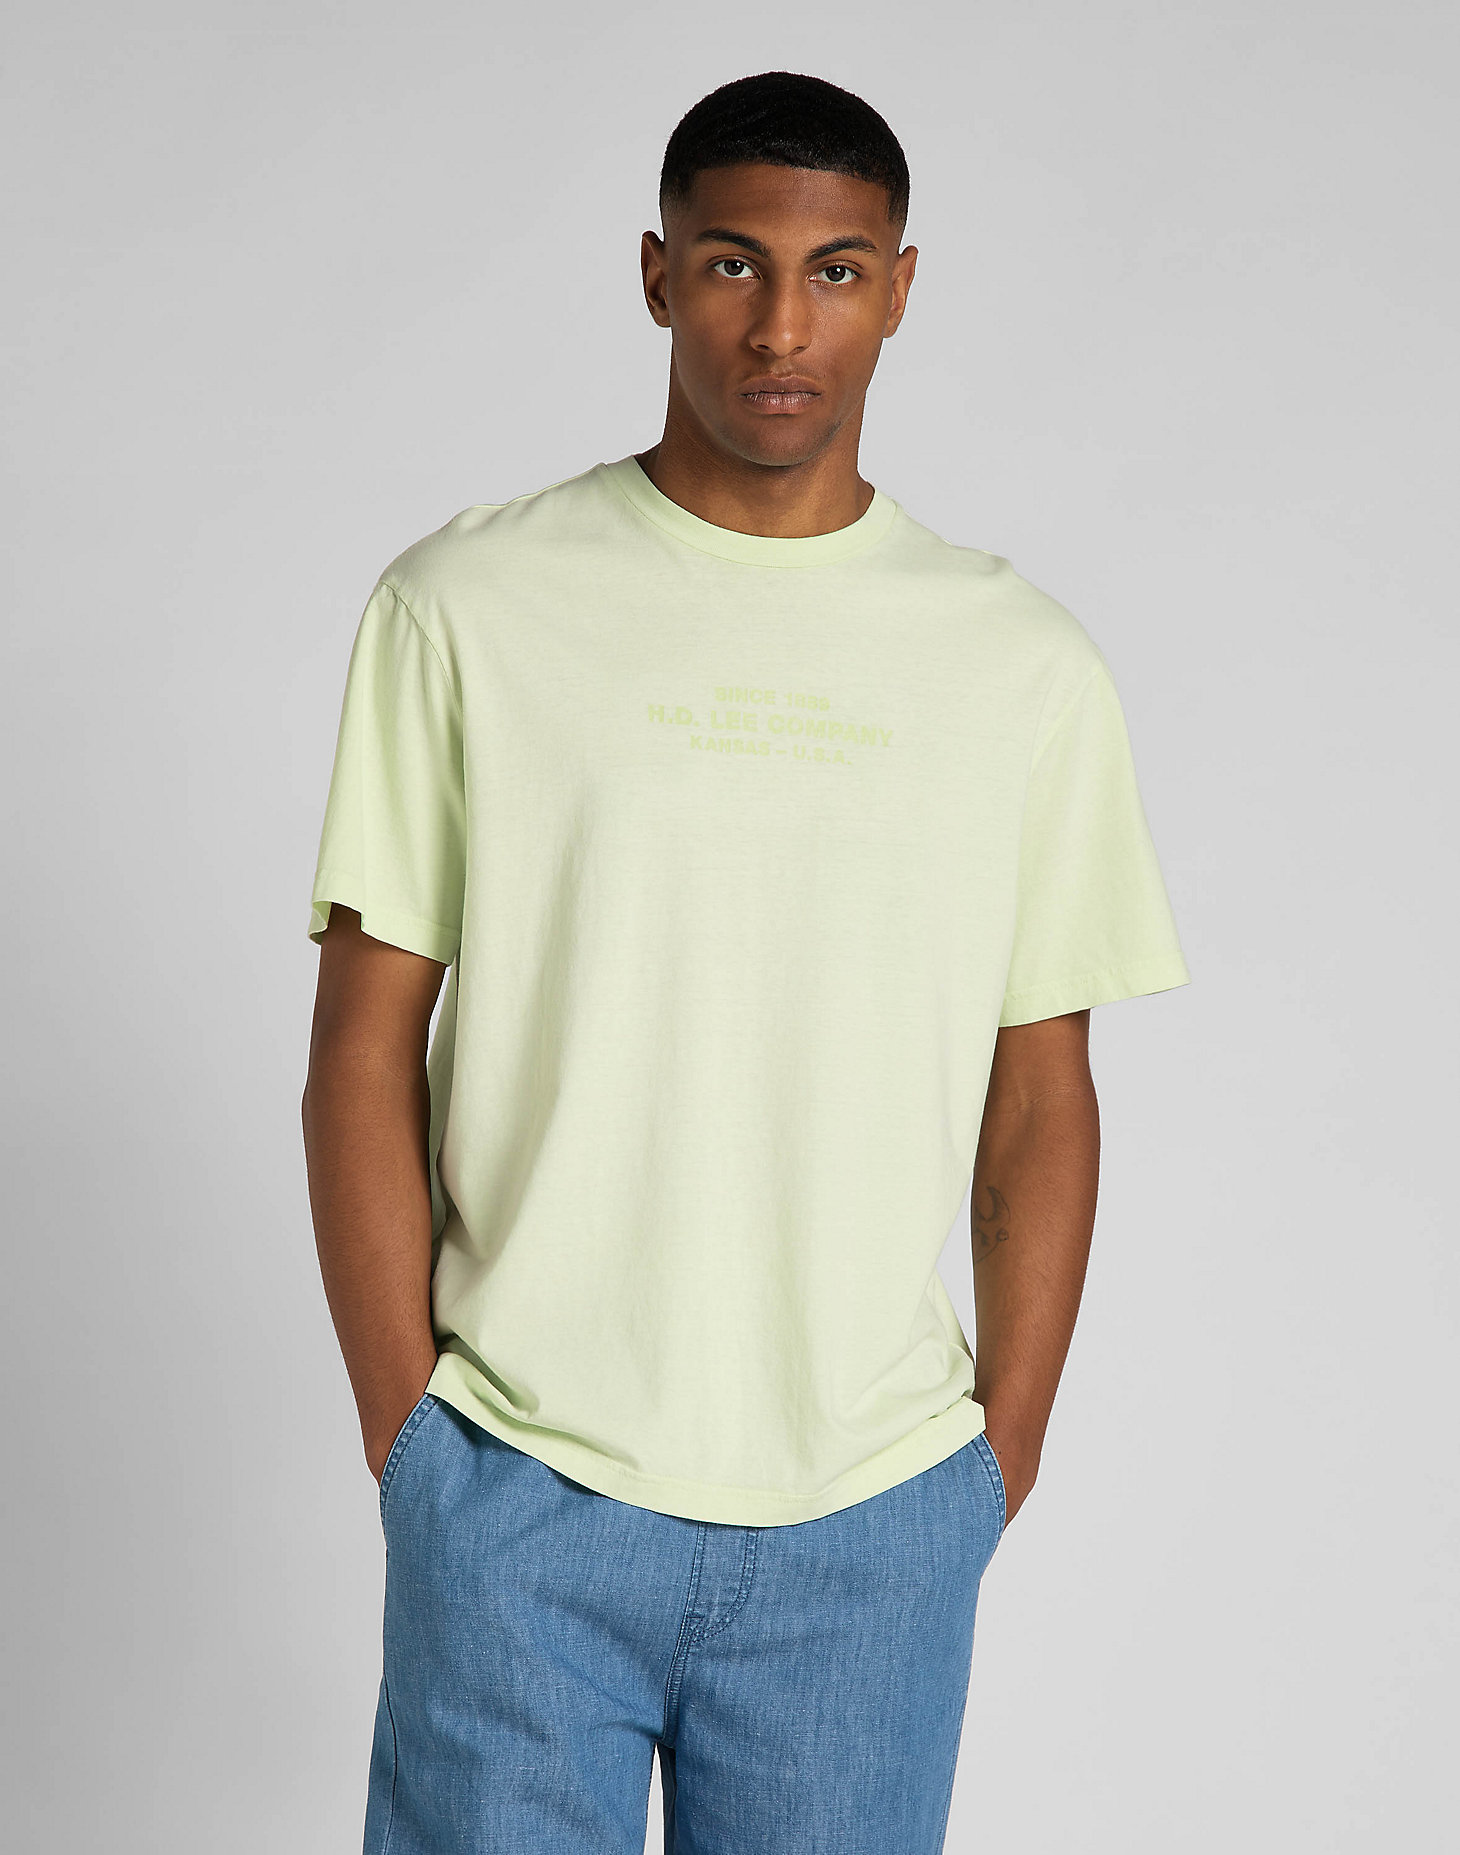 Logo Loose Tee in Canary Green main view